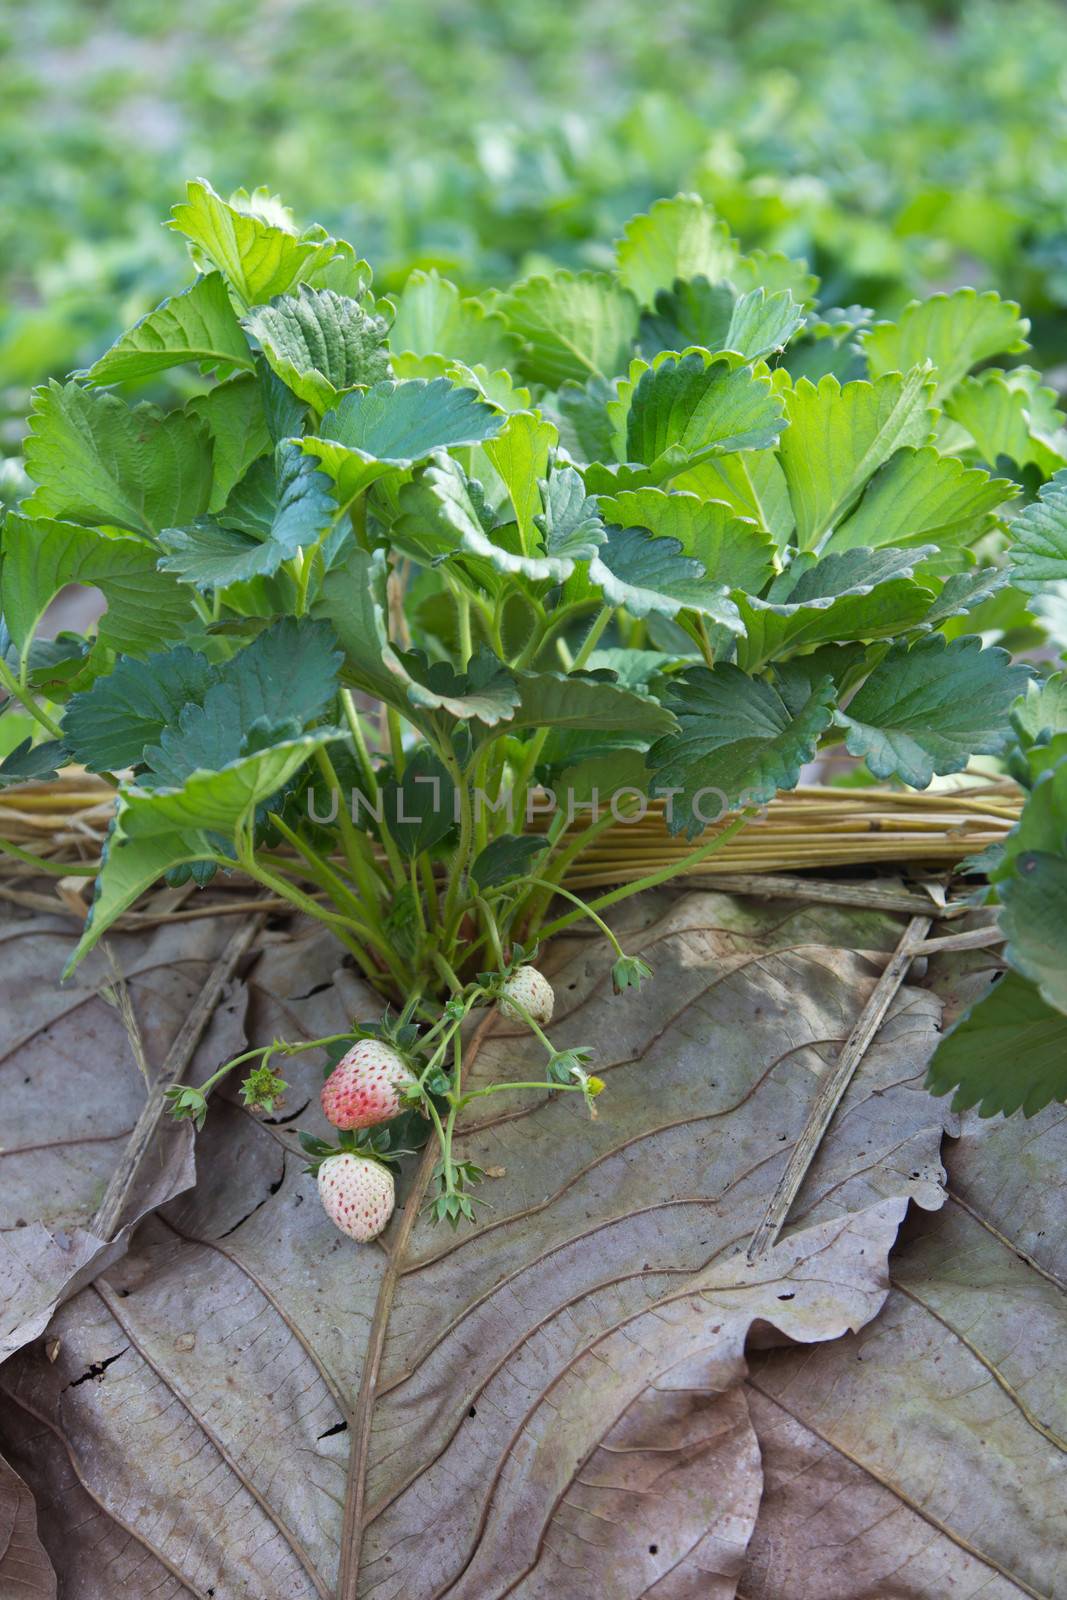 Strawberry and blossom on strawberry plant in strawberry patch.